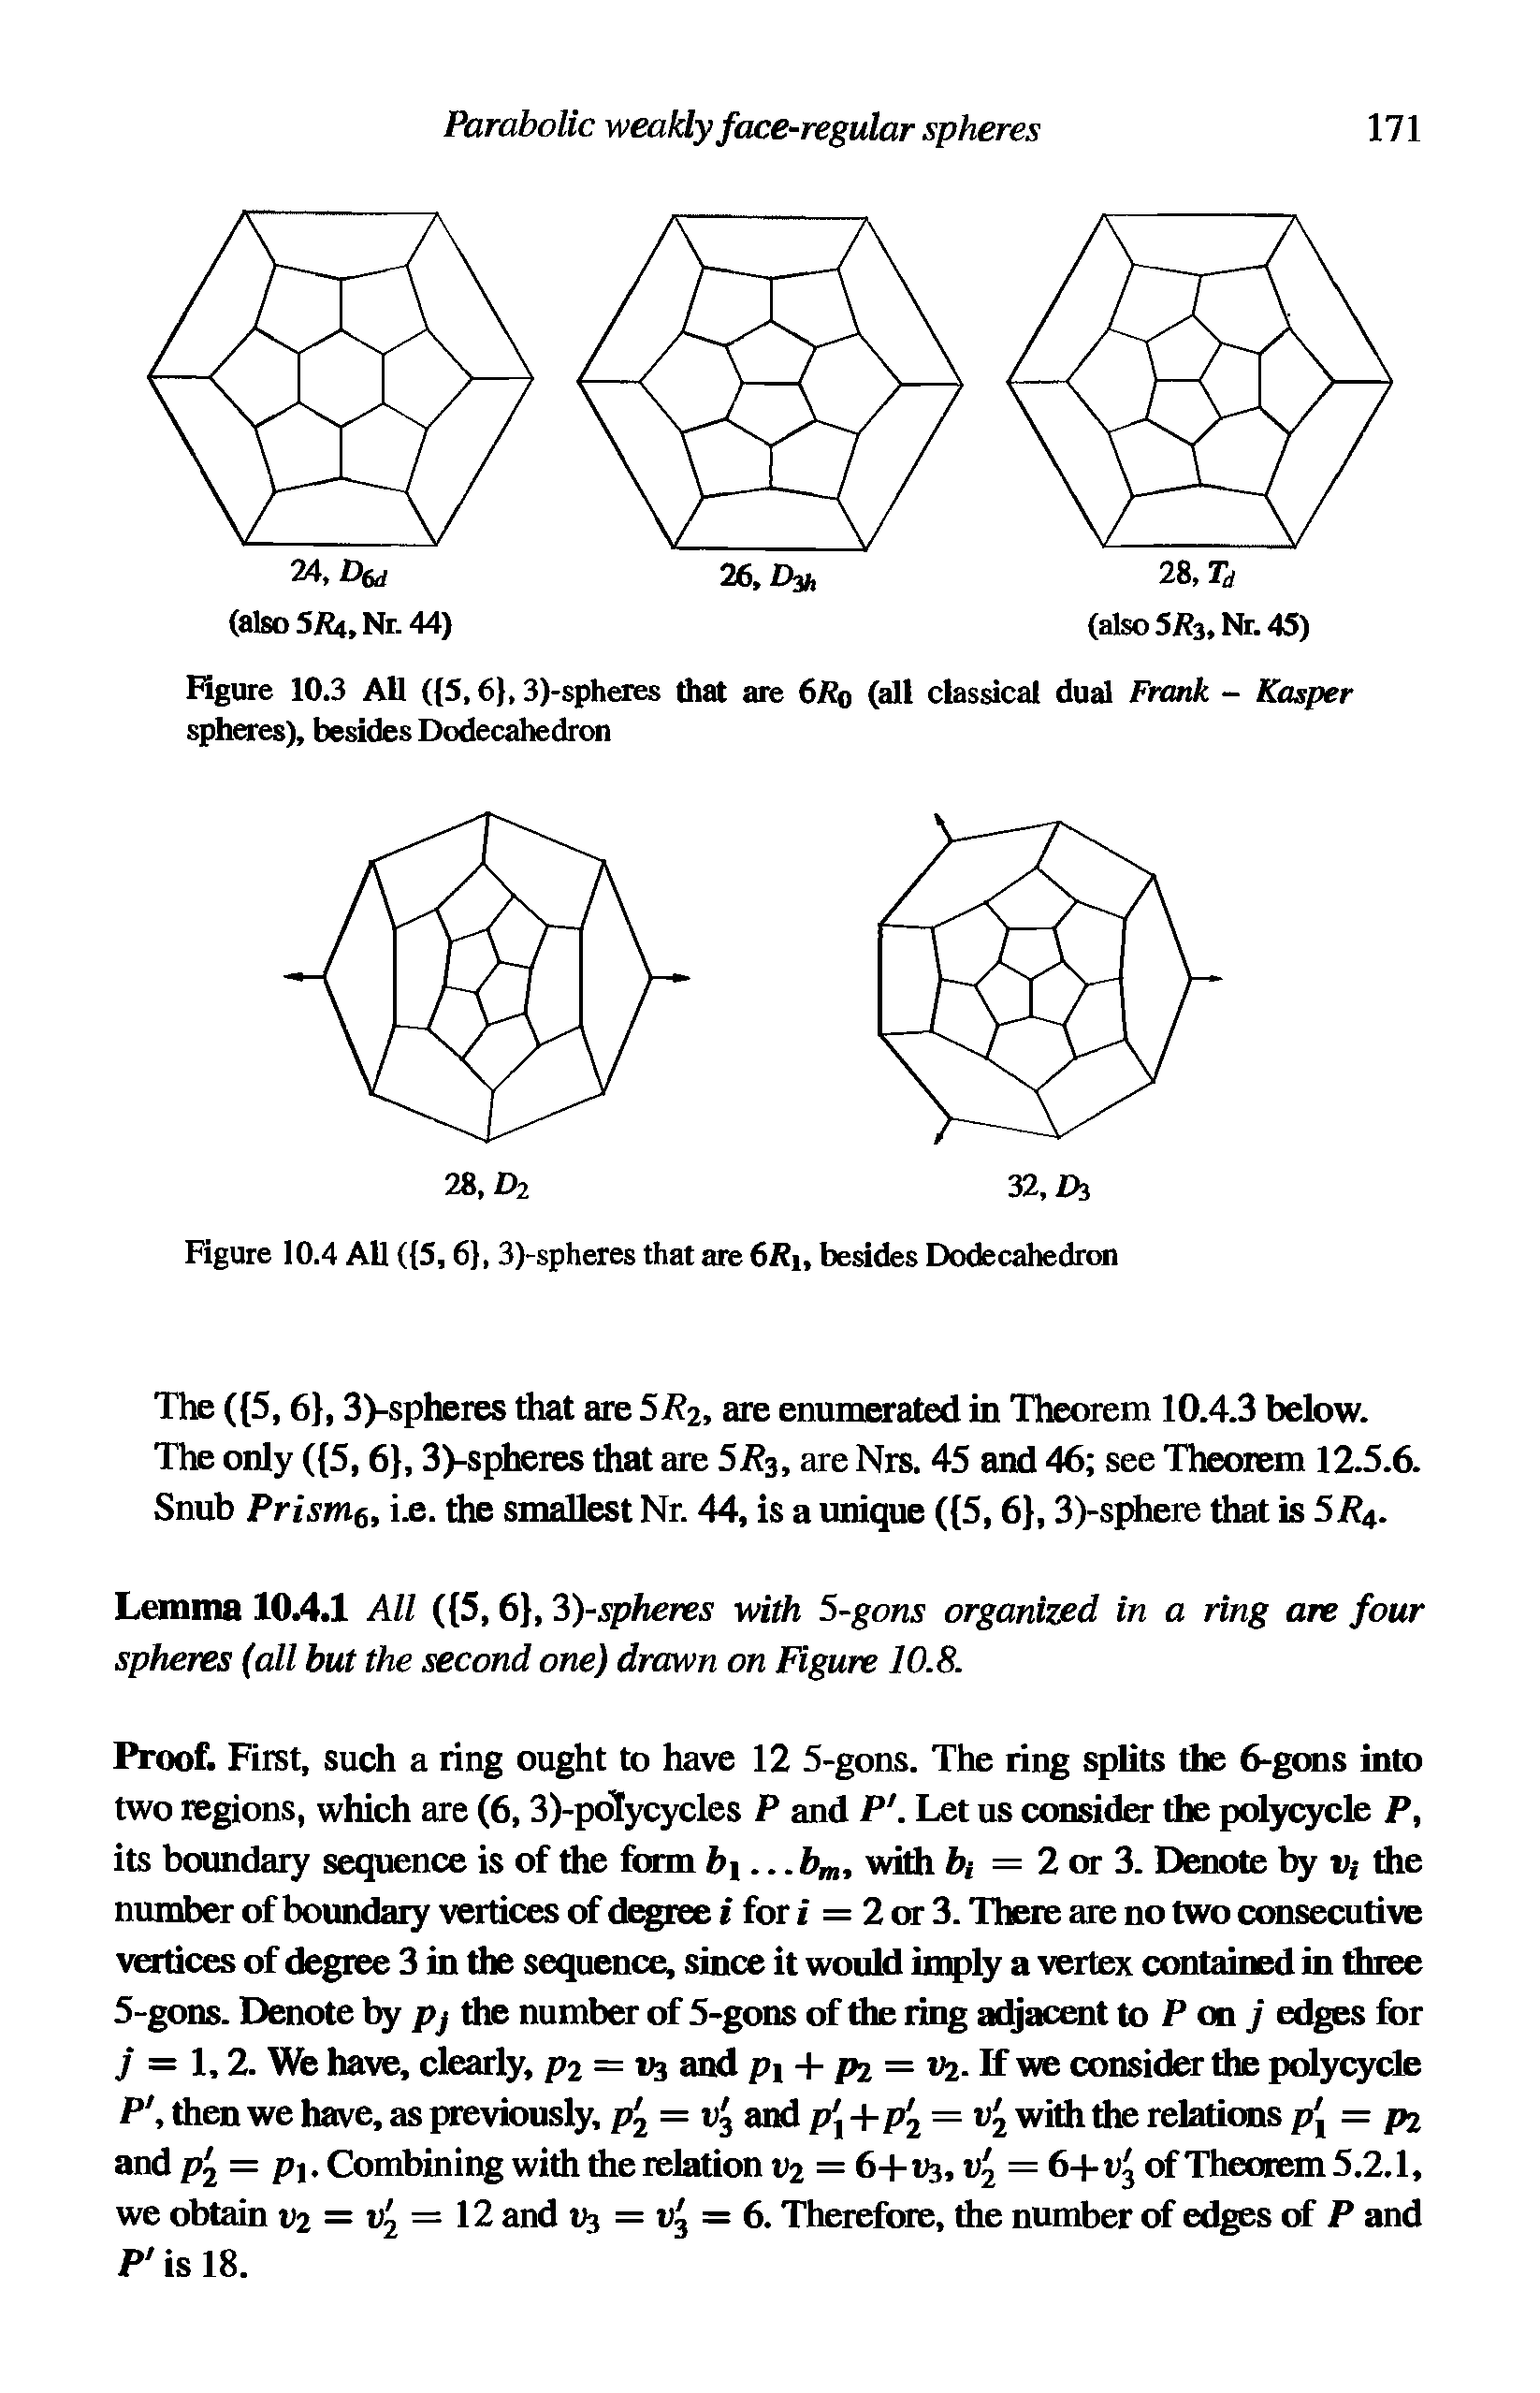 Figure 10.3 All ( 5,6, 3)-spheres that are 6Rq (all classical dual Frank - Kasper spheres), besides Dodecahedron...